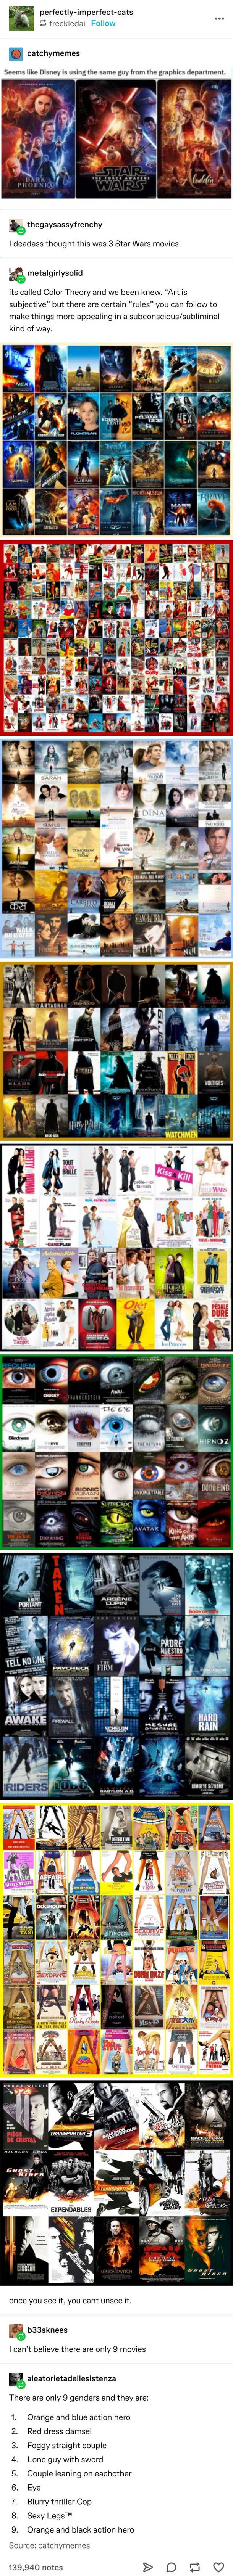 Bob from graphics department worked on all these movies